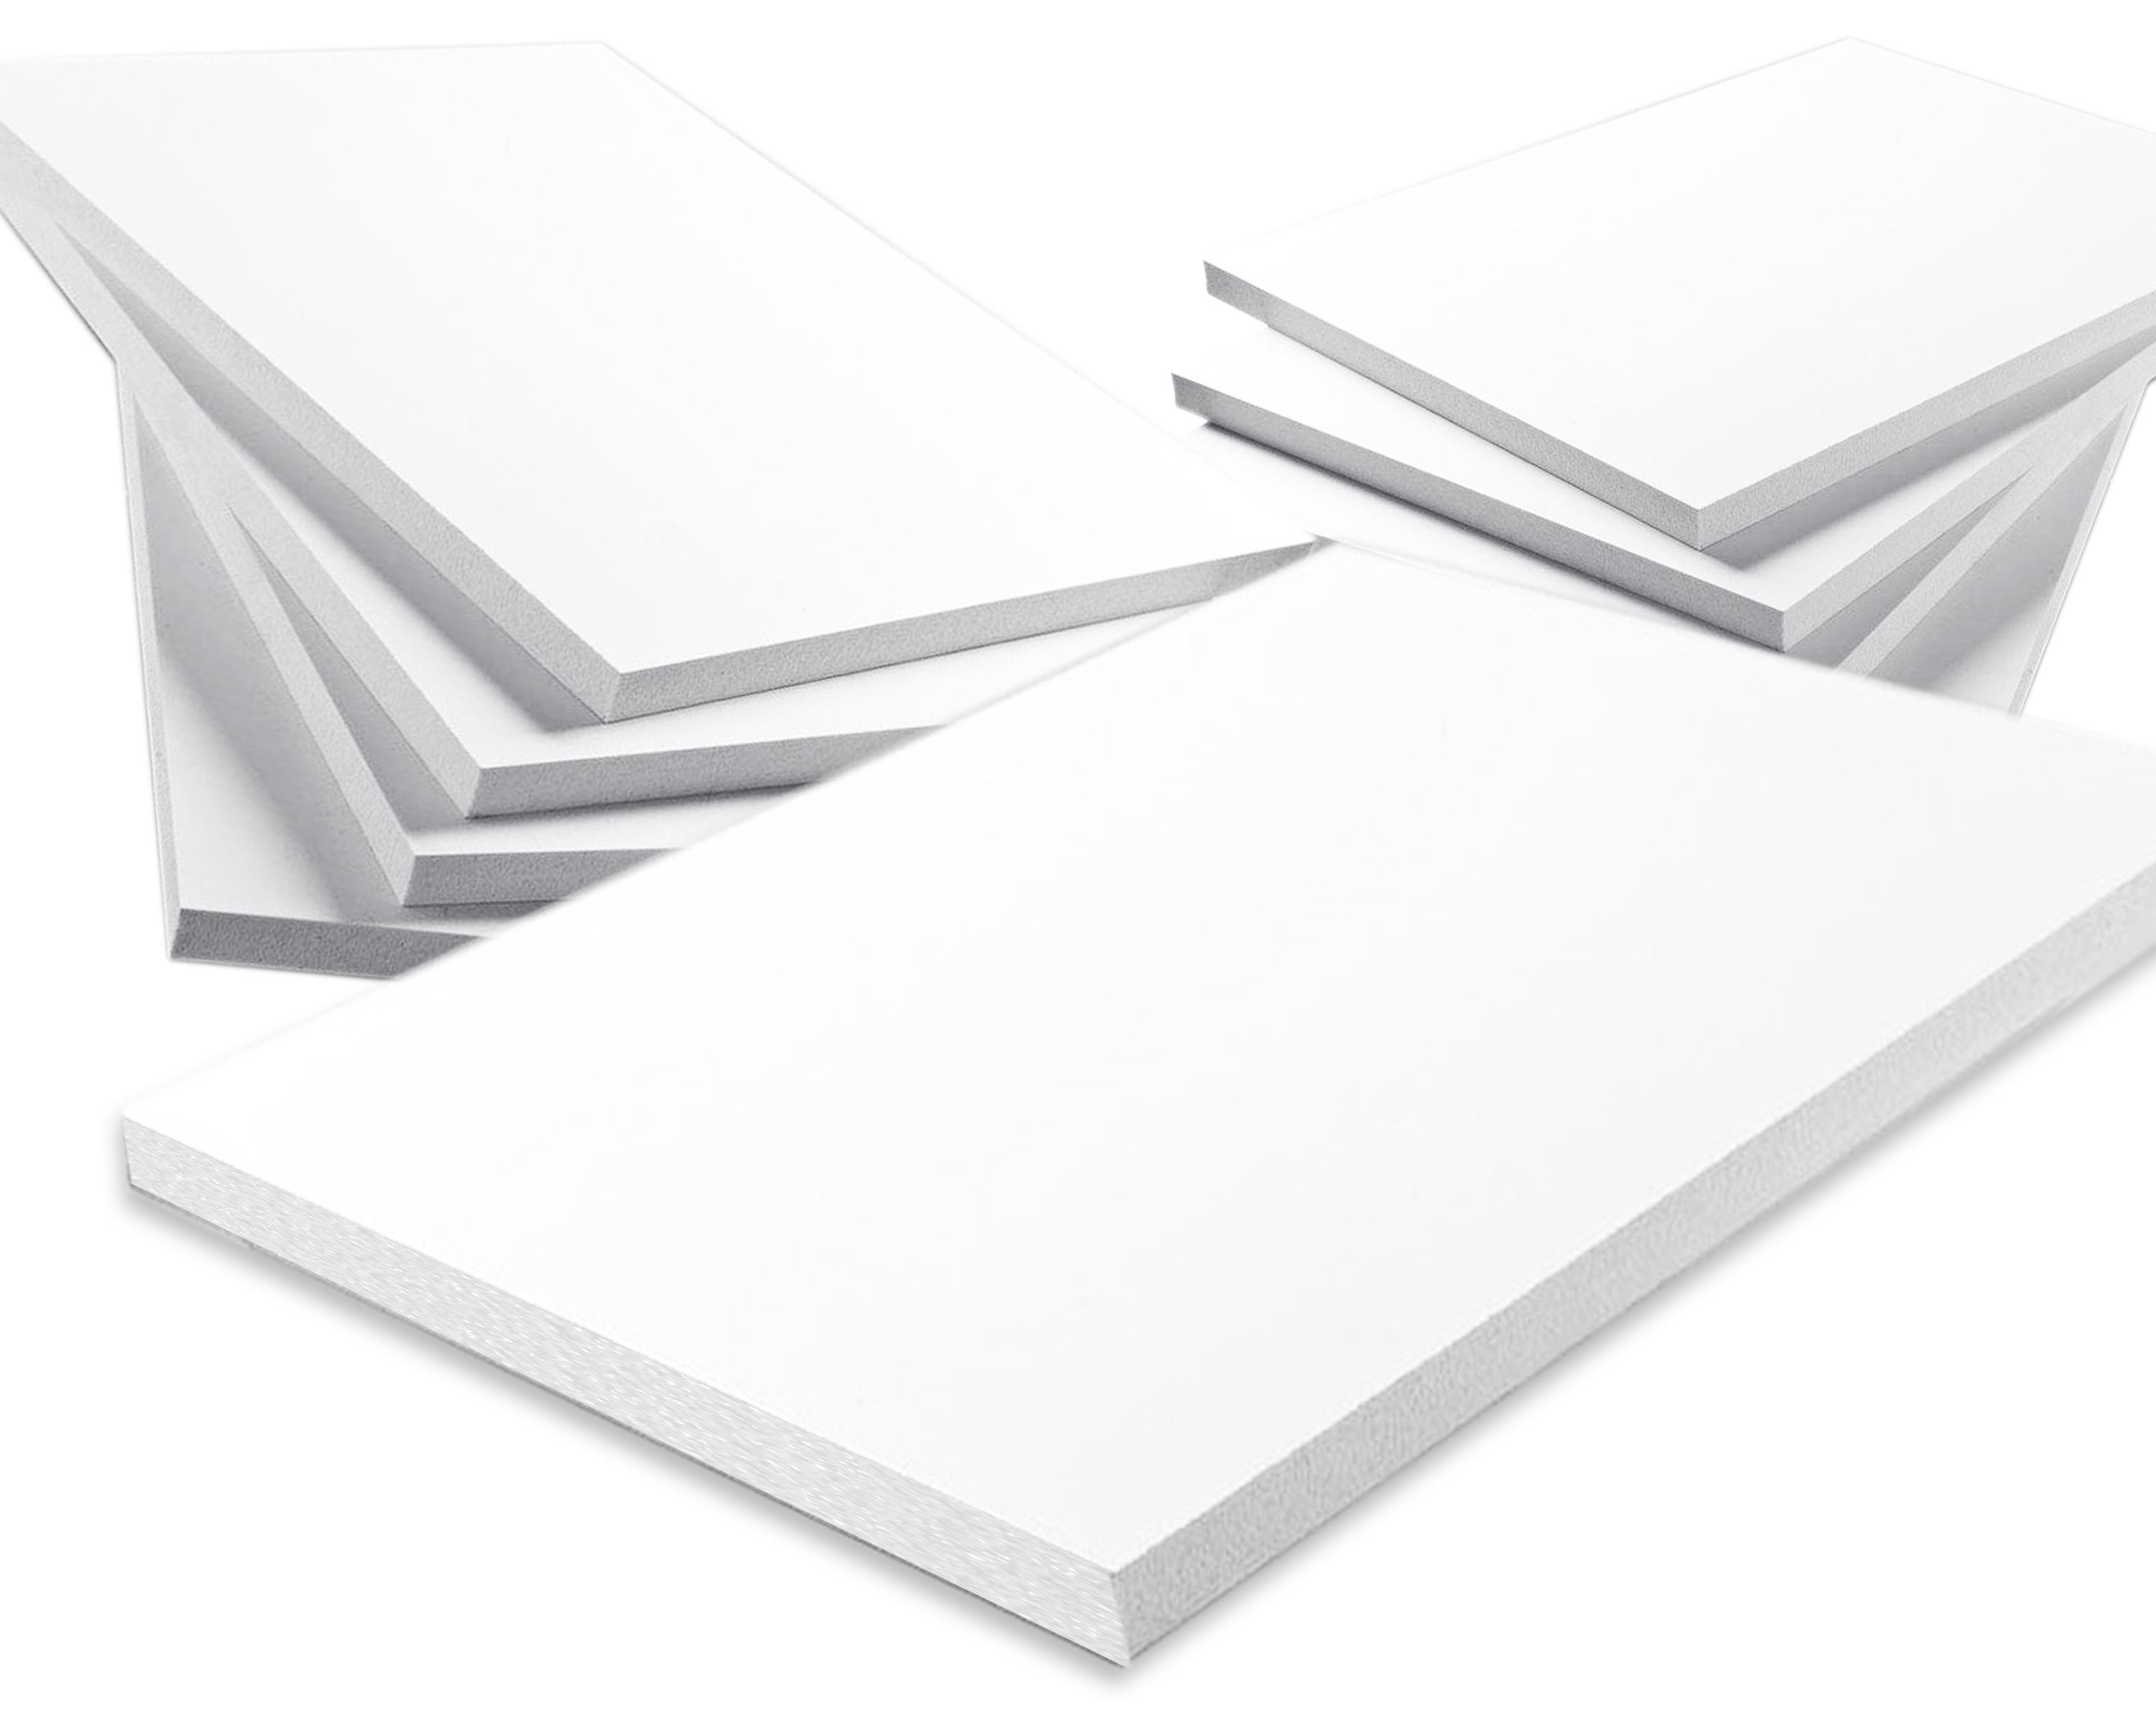 Foam Core Backing Board 3/8 White 16x20- 5 Pack. Many Sizes Available.  Acid Free Buffered Craft Poster Board for Signs, Presentations, School,  Office and Art Projects 